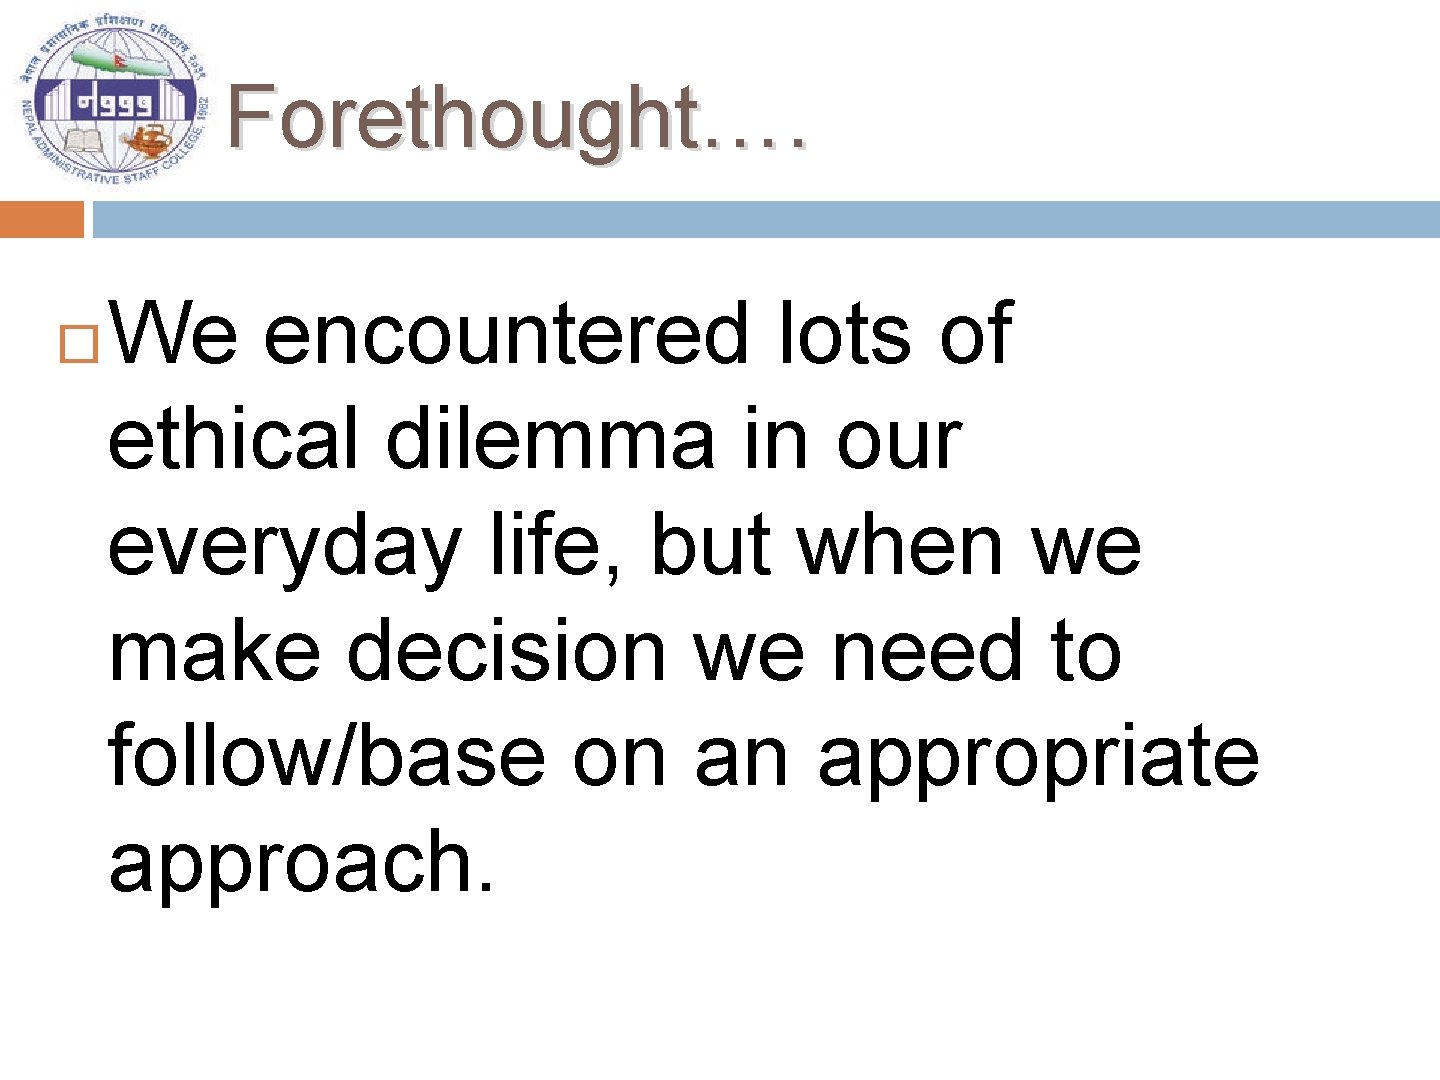 Forethought…. We encountered lots of ethical dilemma in our everyday life, but when we